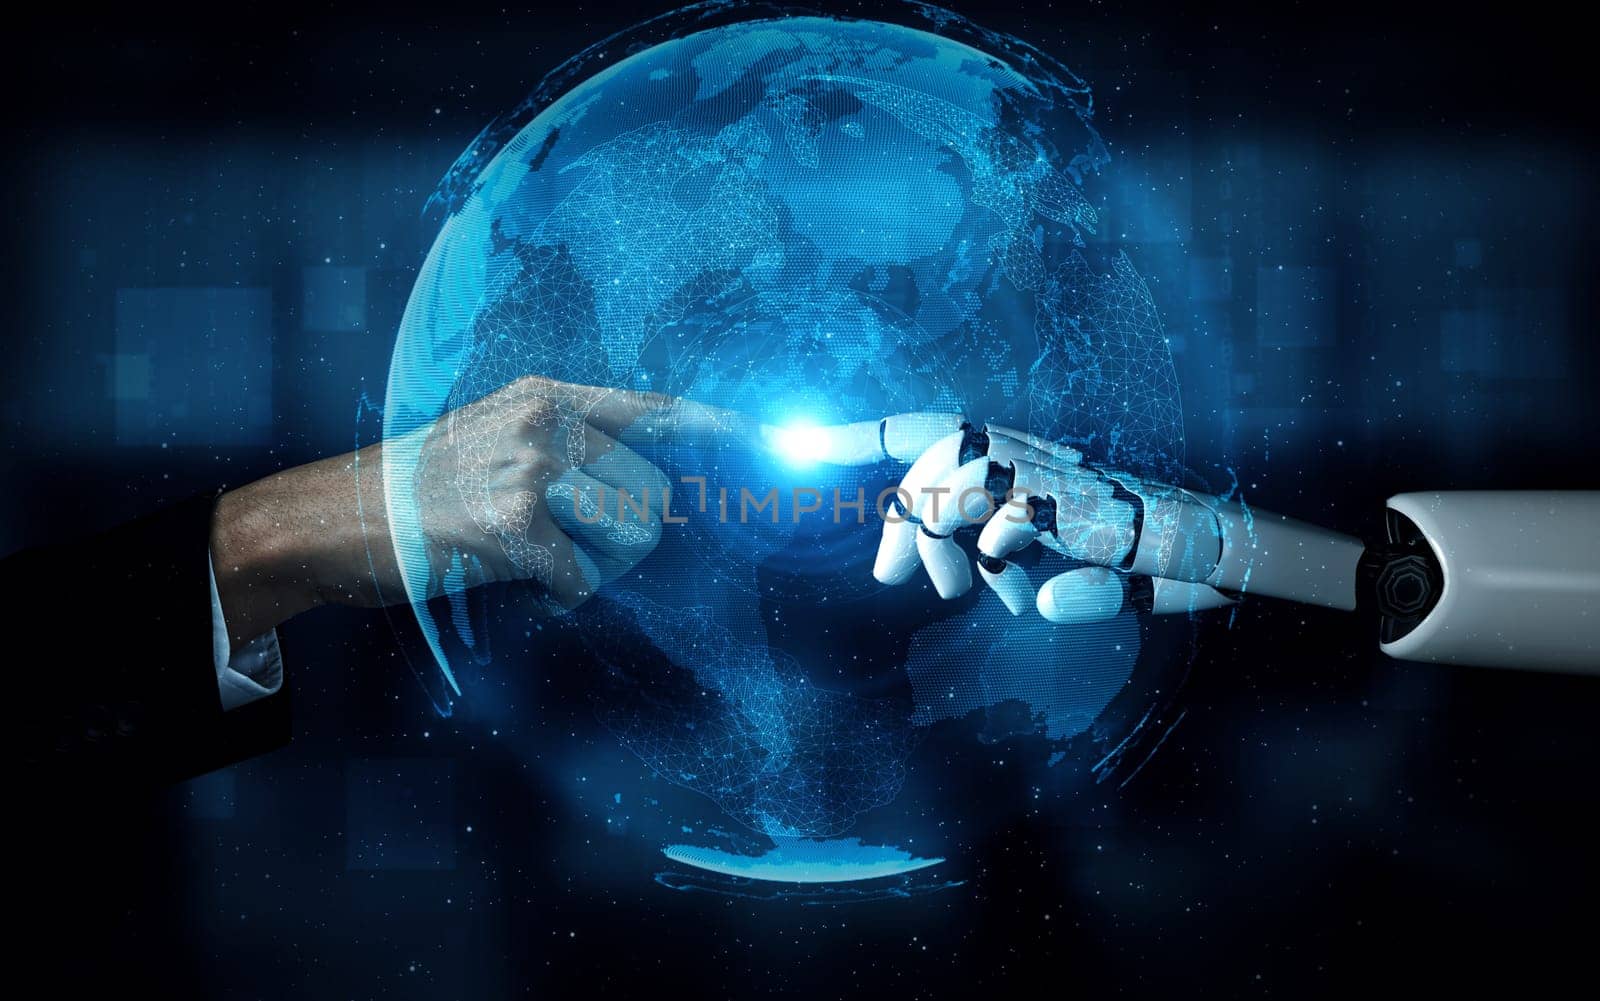 XAI 3D rendering artificial intelligence AI research of robot and cyborg development for future of people living. Digital data mining and machine learning technology design for computer brain.